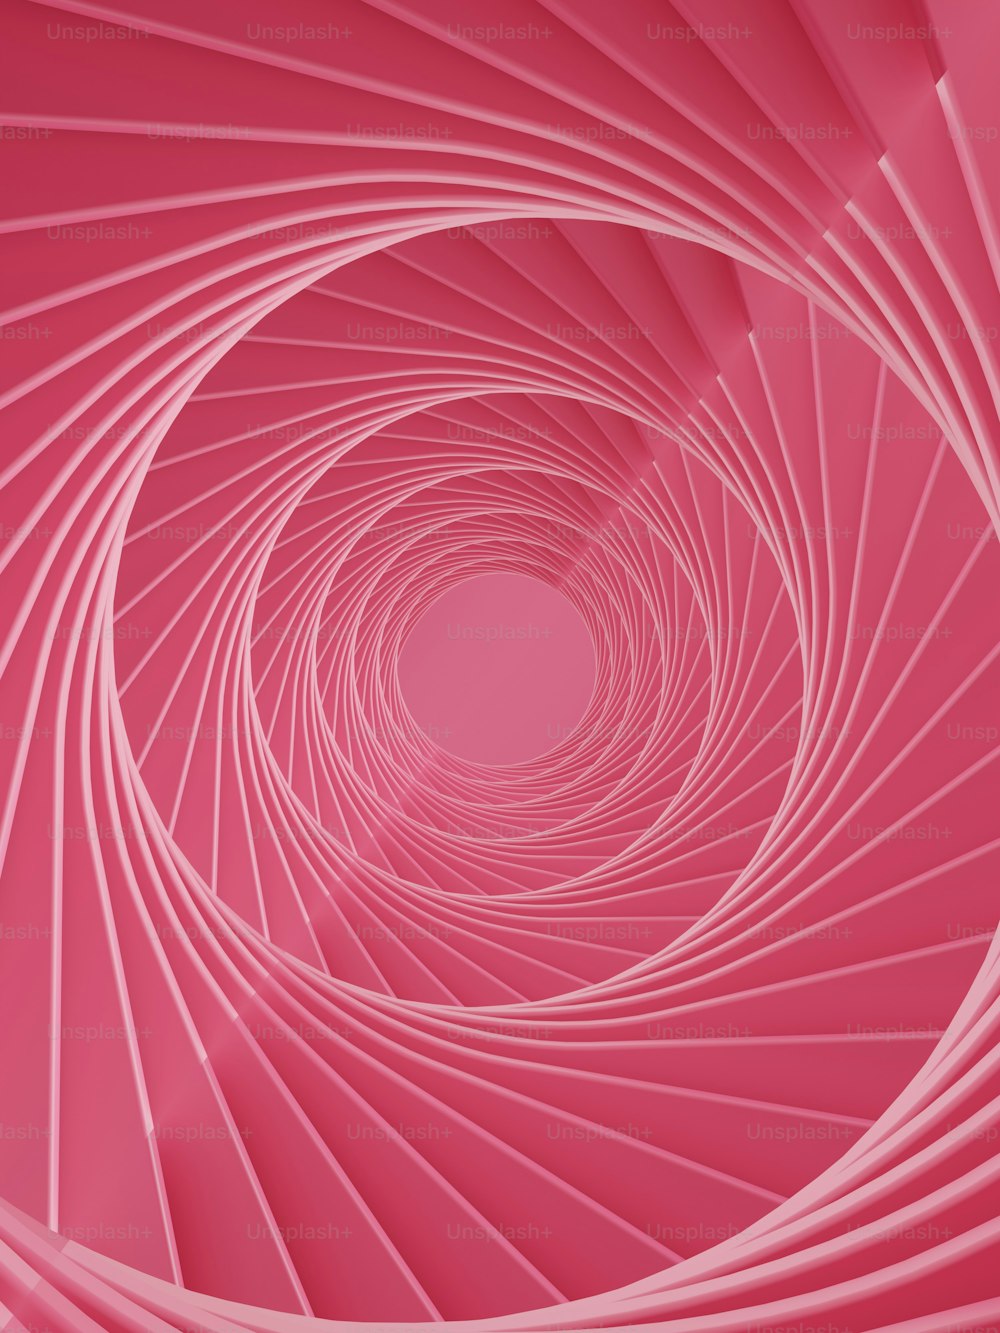 a pink background with a spiral design in the center